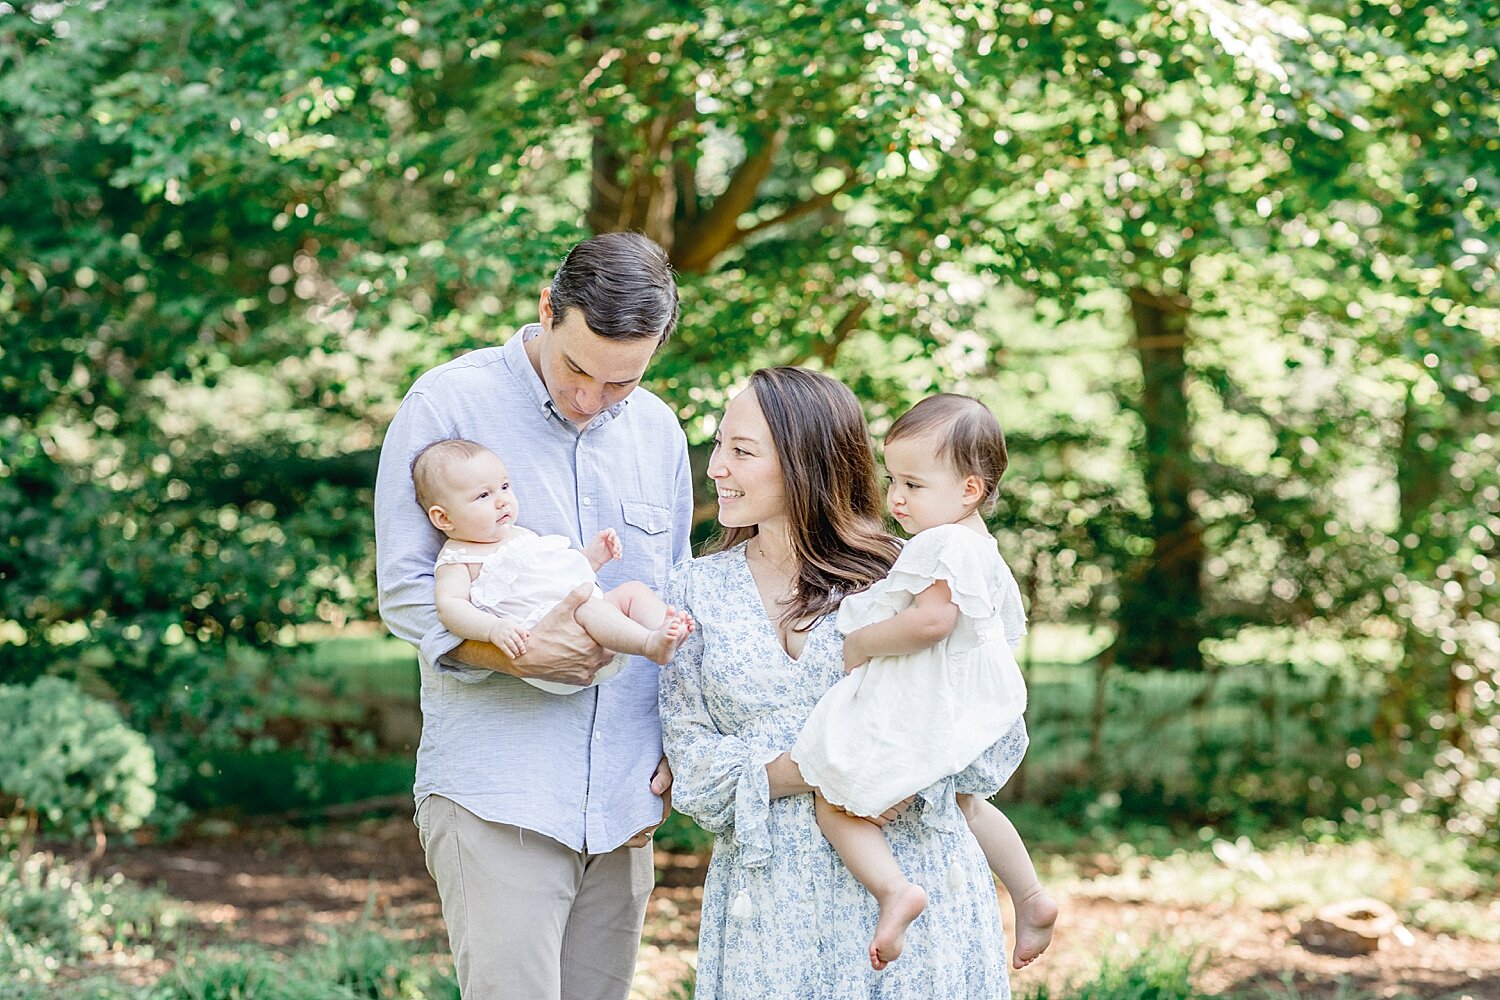 Family of four outside at a park for newborn photoshoot during pandemic. Photos by Kristin Wood Photography.